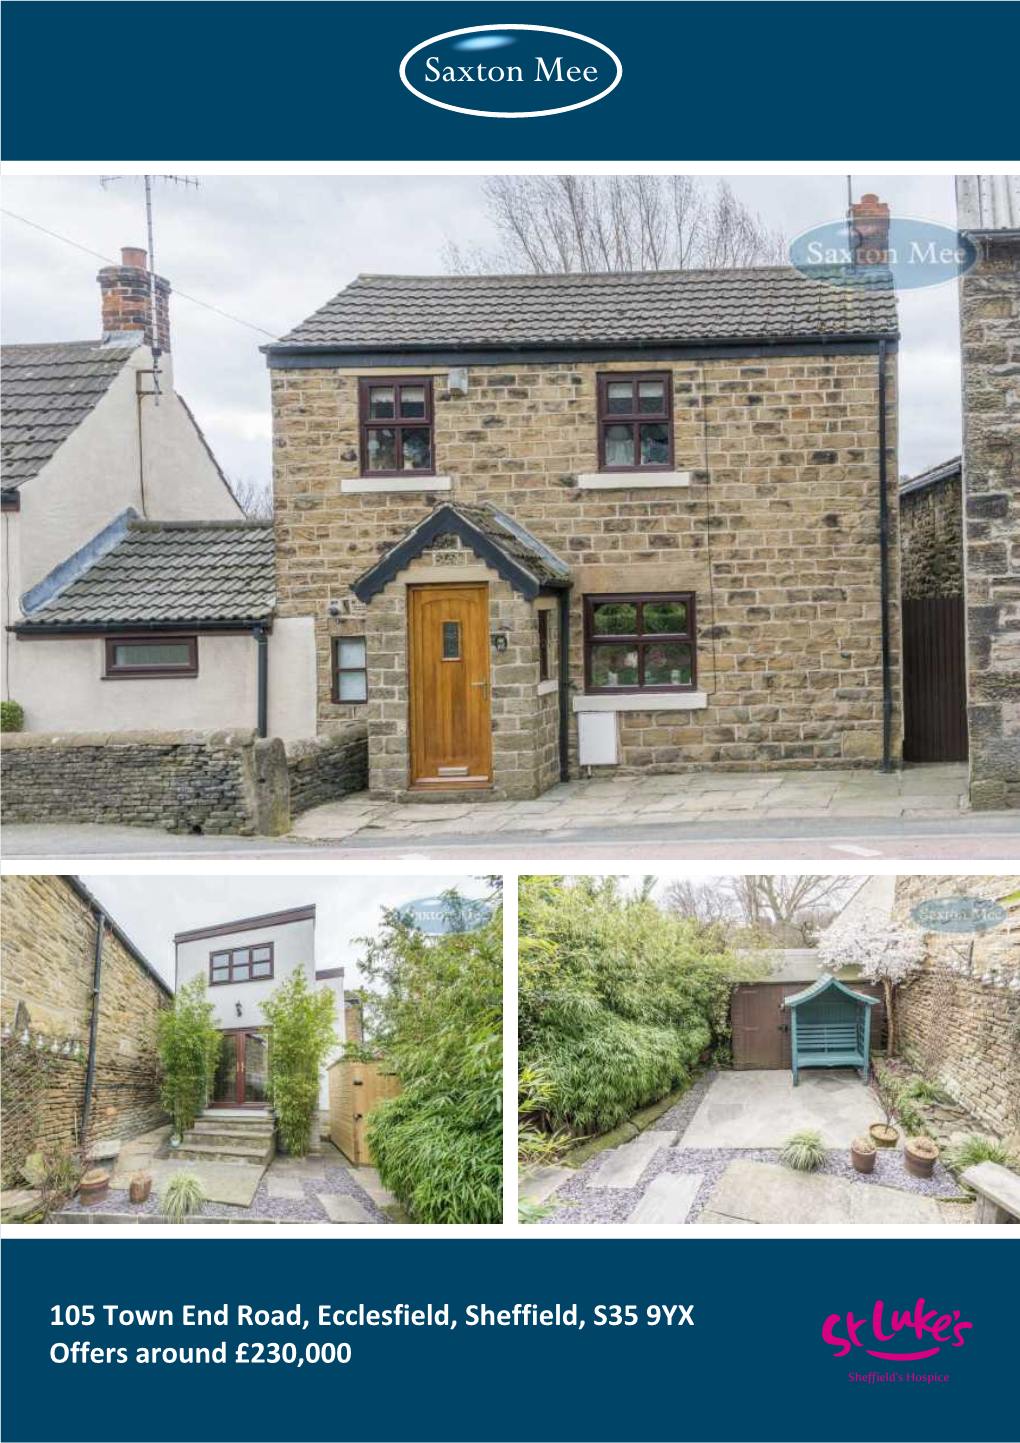 105 Town End Road, Ecclesfield, Sheffield, S35 9YX Offers Around £230,000 She Ield’S Hospice 105 Town End Road Ecclesfield Offers Around £230,000